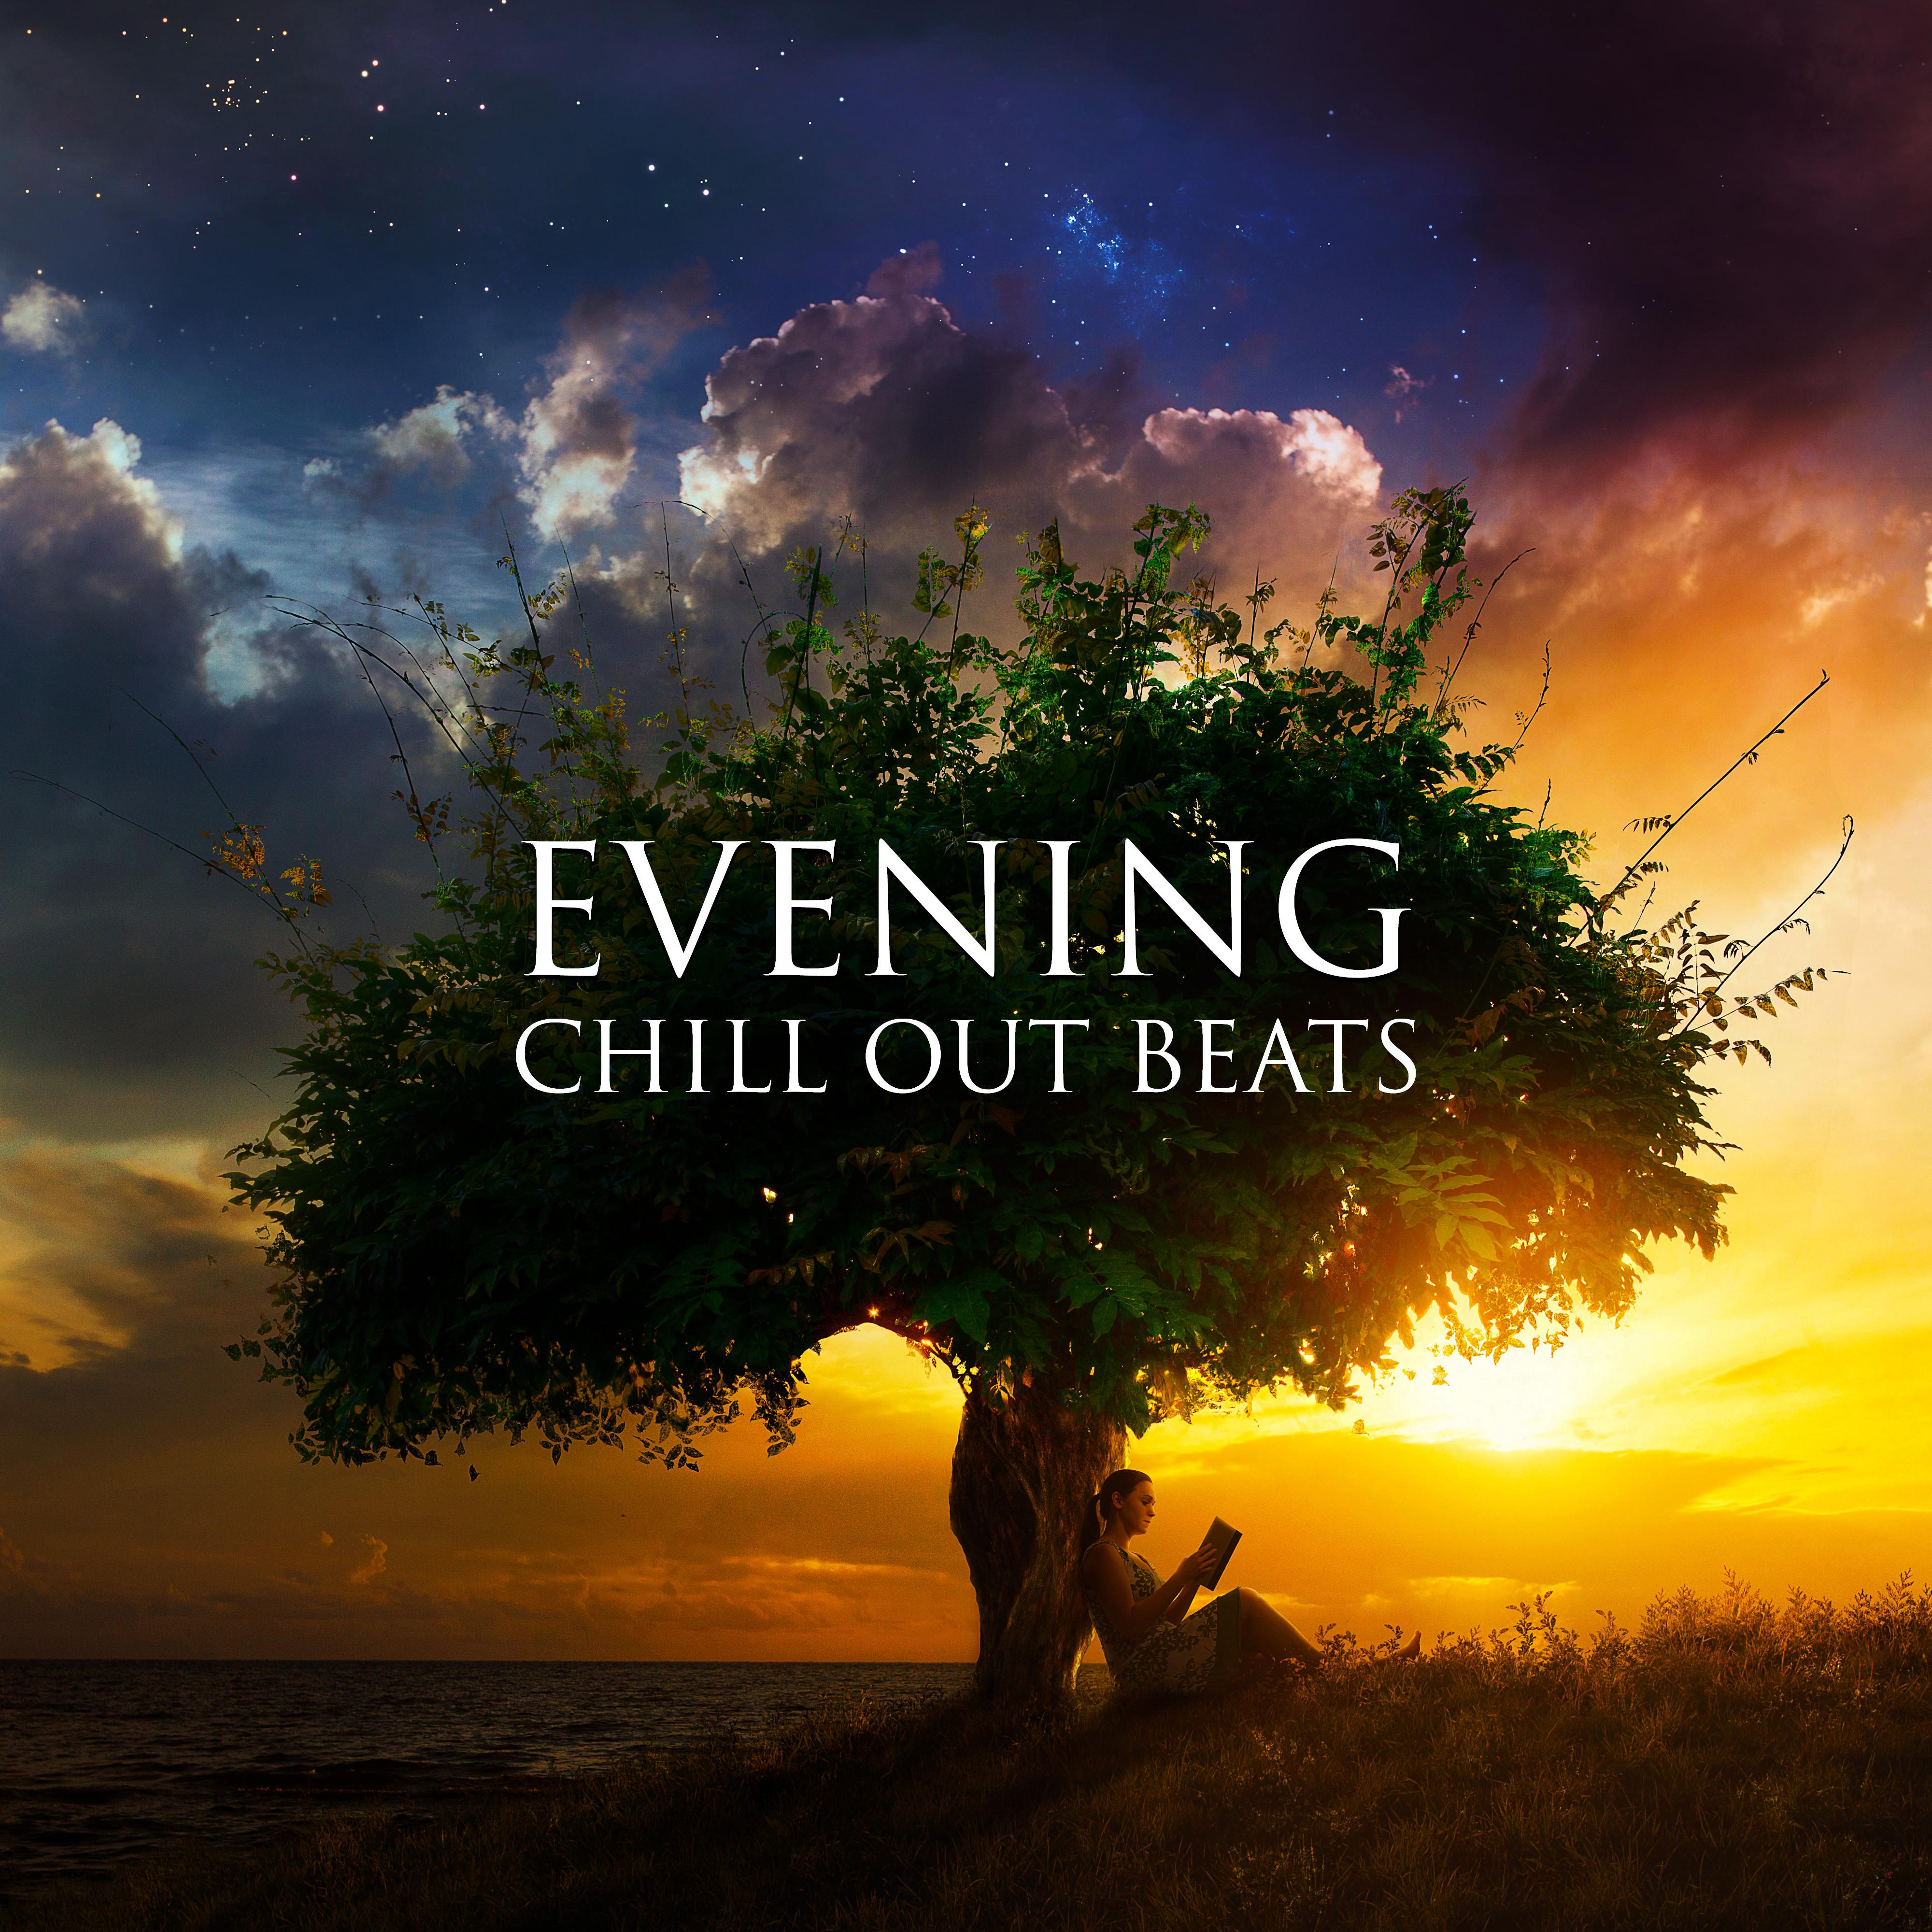 Evening Chill Out Beats – Summer Chill Out, Stress Relief, Peaceful Beats, Calming Night Sounds